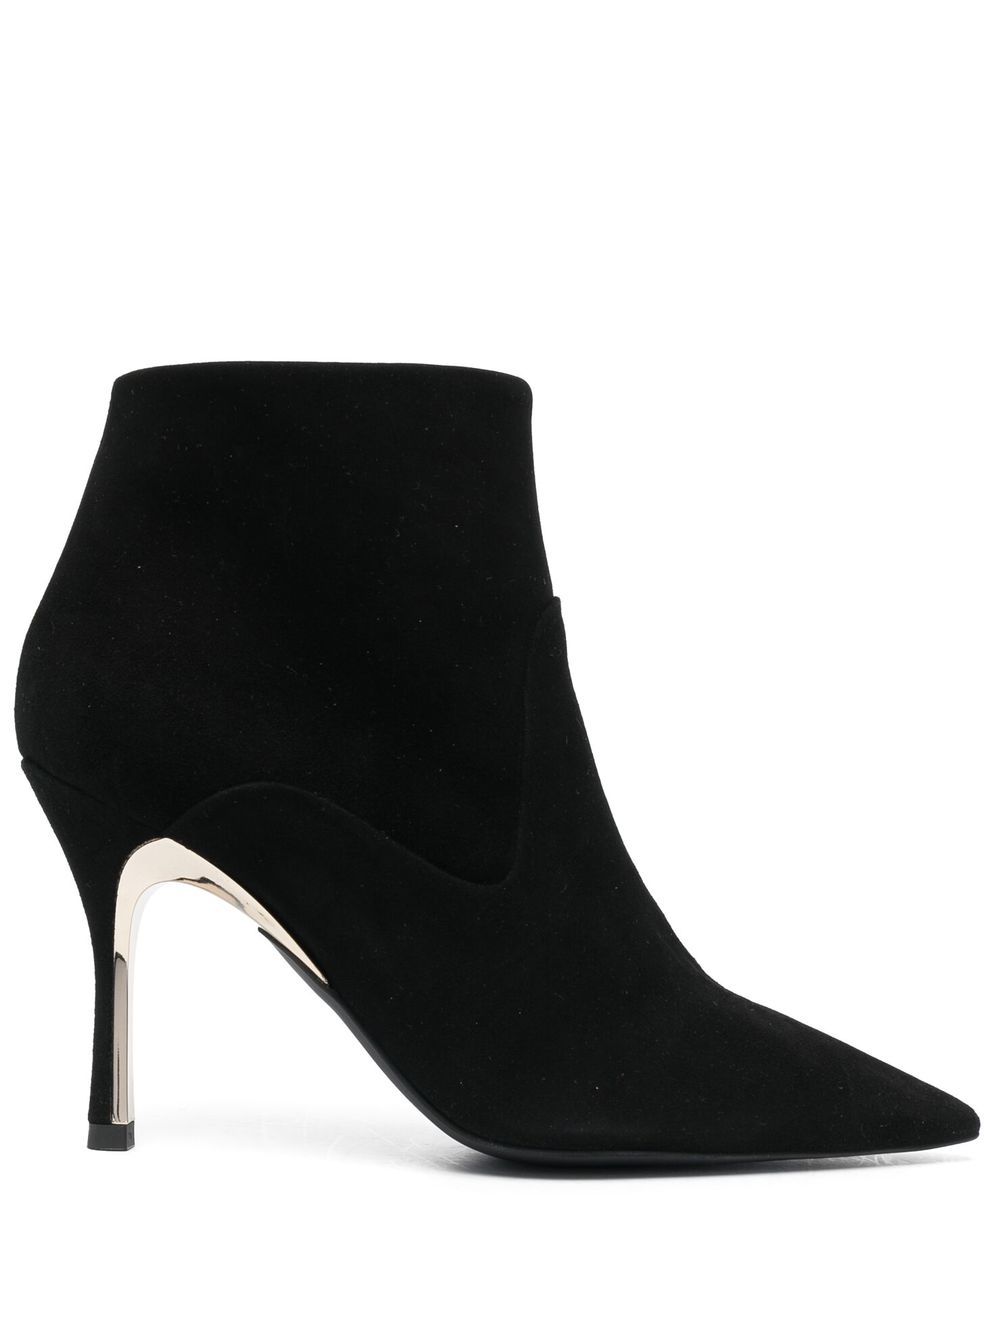 Image 1 of Furla pointed 90mm heeled boots